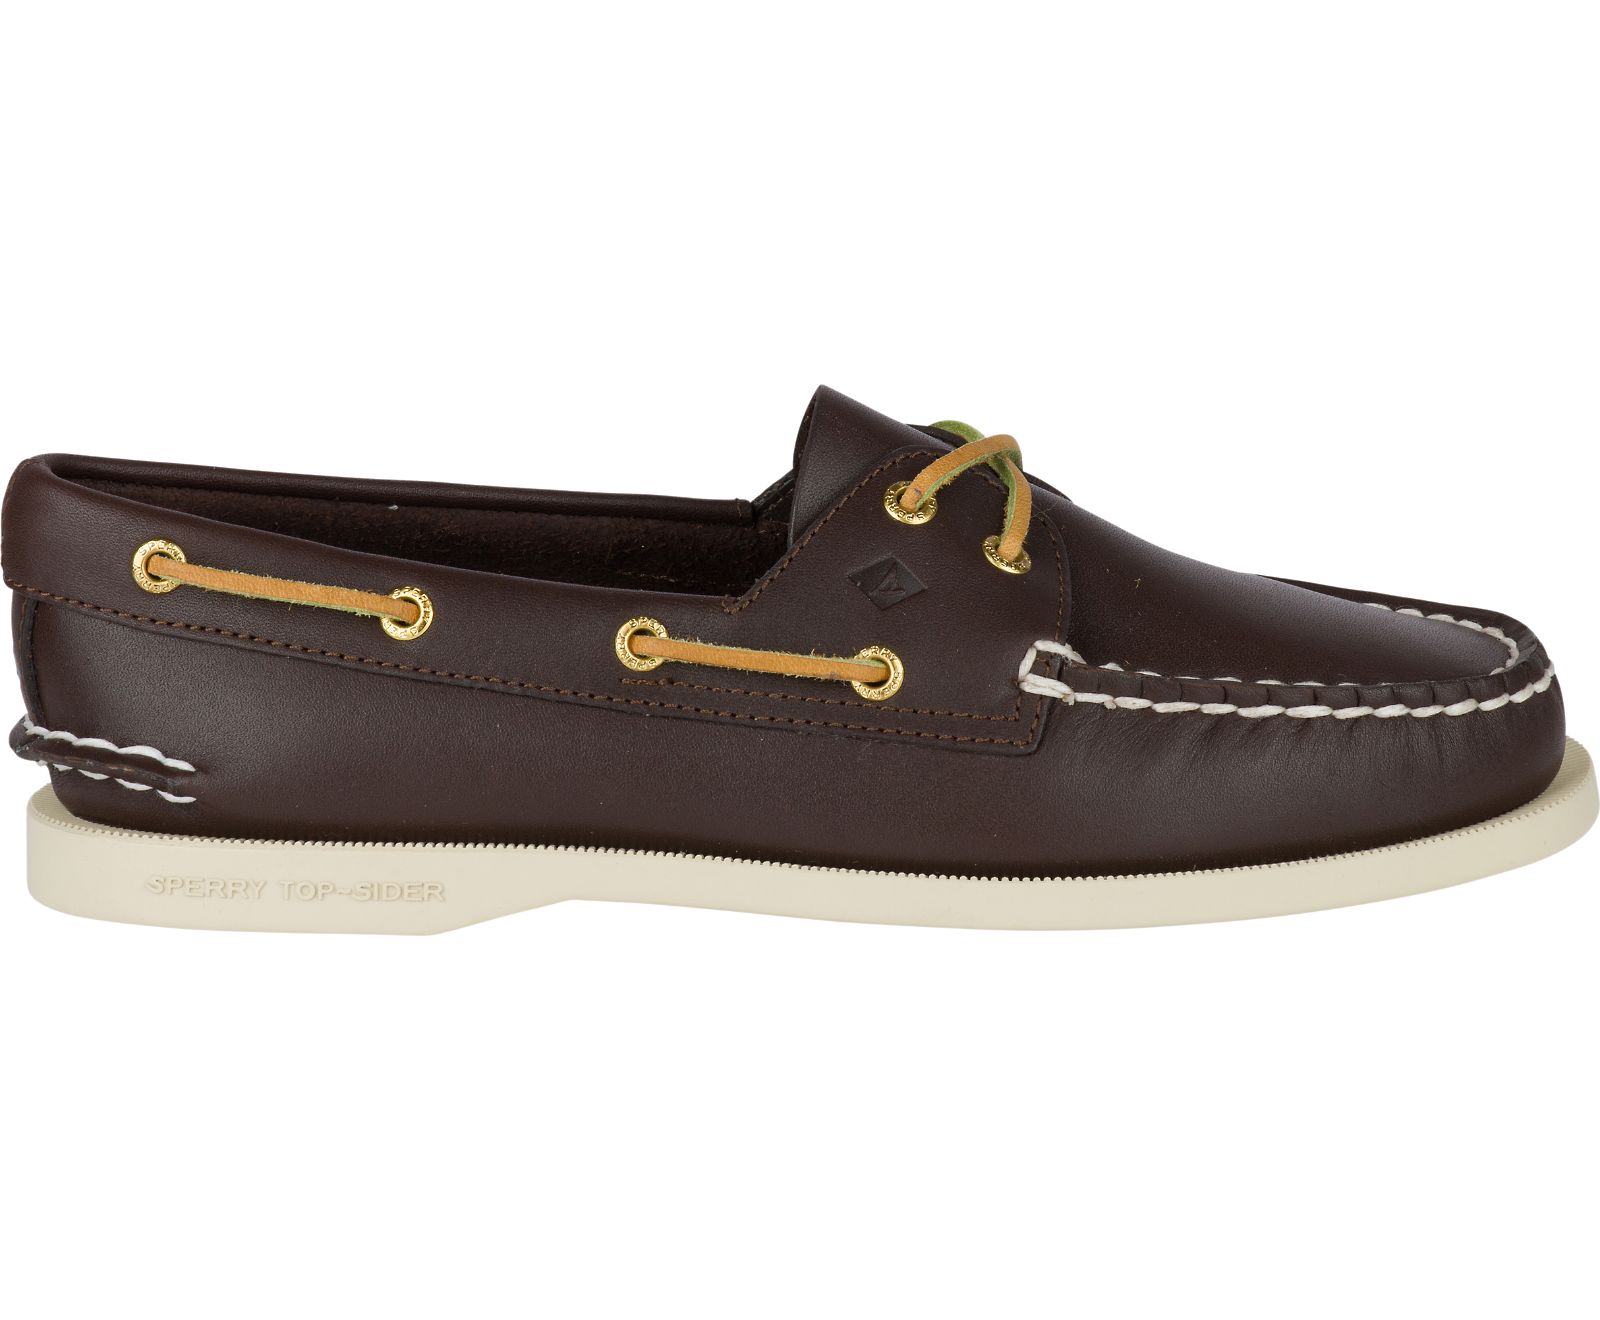 Women's Authentic Original Boat Shoe - Classic Brown Leather